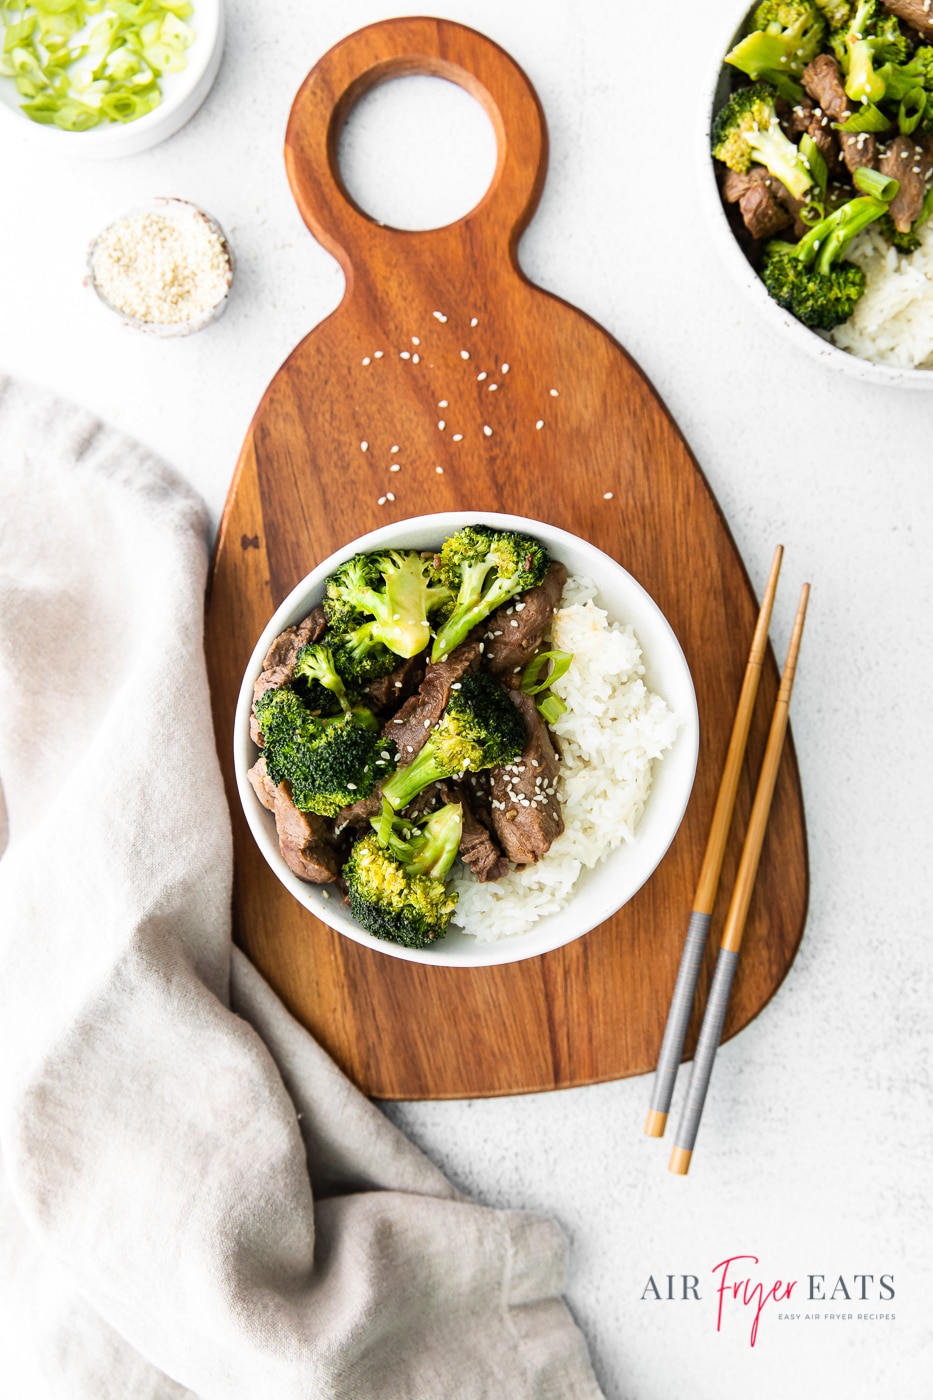 Photo of a white bowl containing beef, broccoli and rice sat on a brown wooden cutting board. Also on the board is a set of chopsticks. To the left of the board is an off-white tea towel and below the board is text with the site's logo